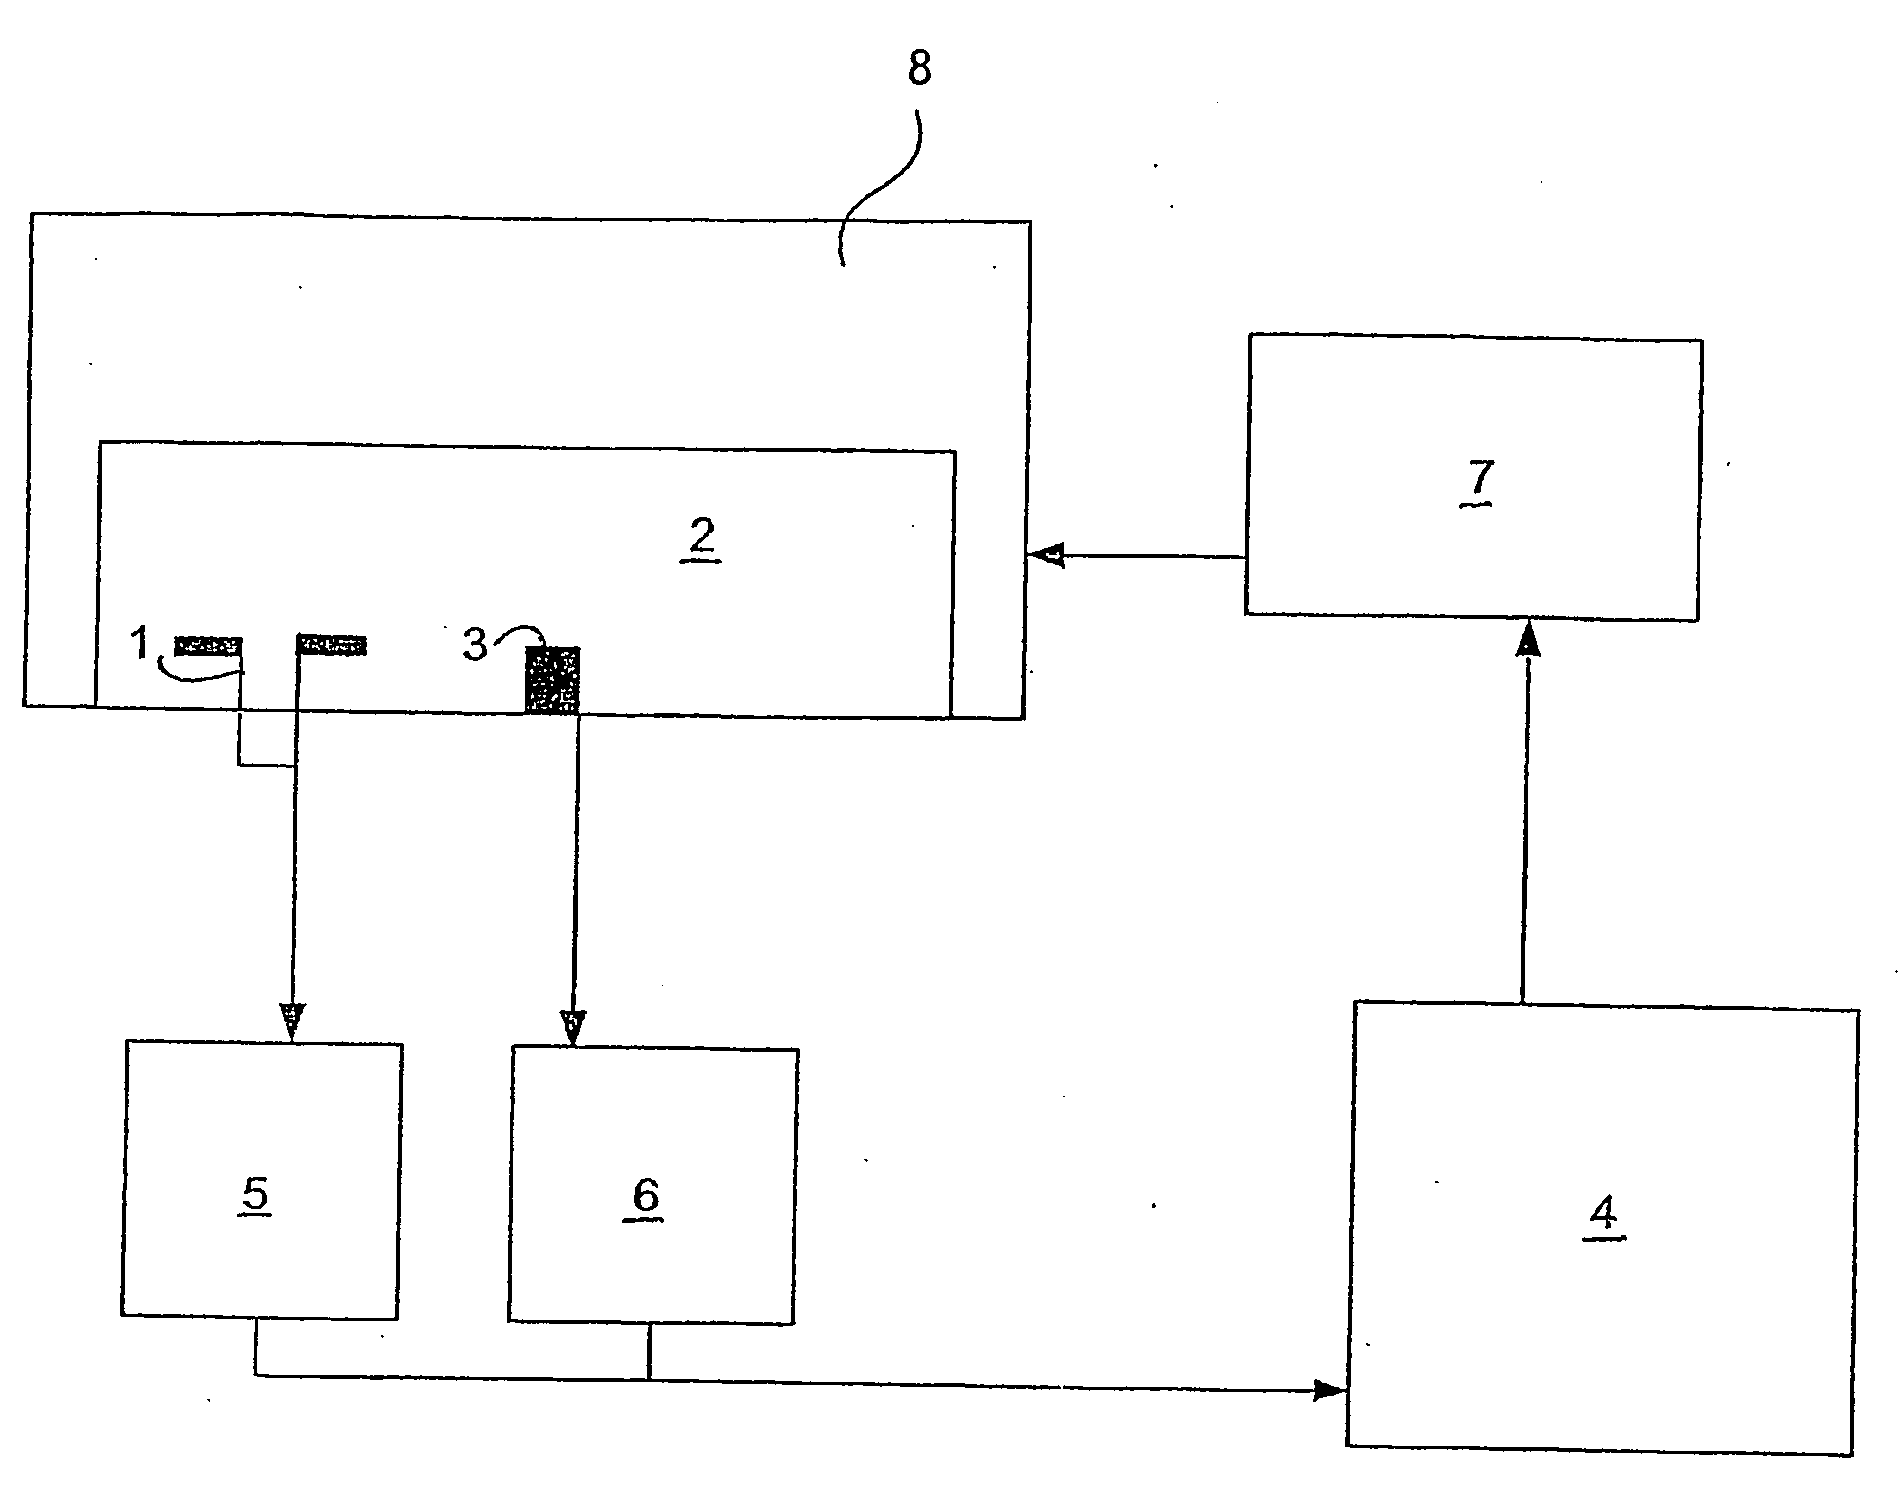 Method for the determination of the stresses occurring in wood when drying